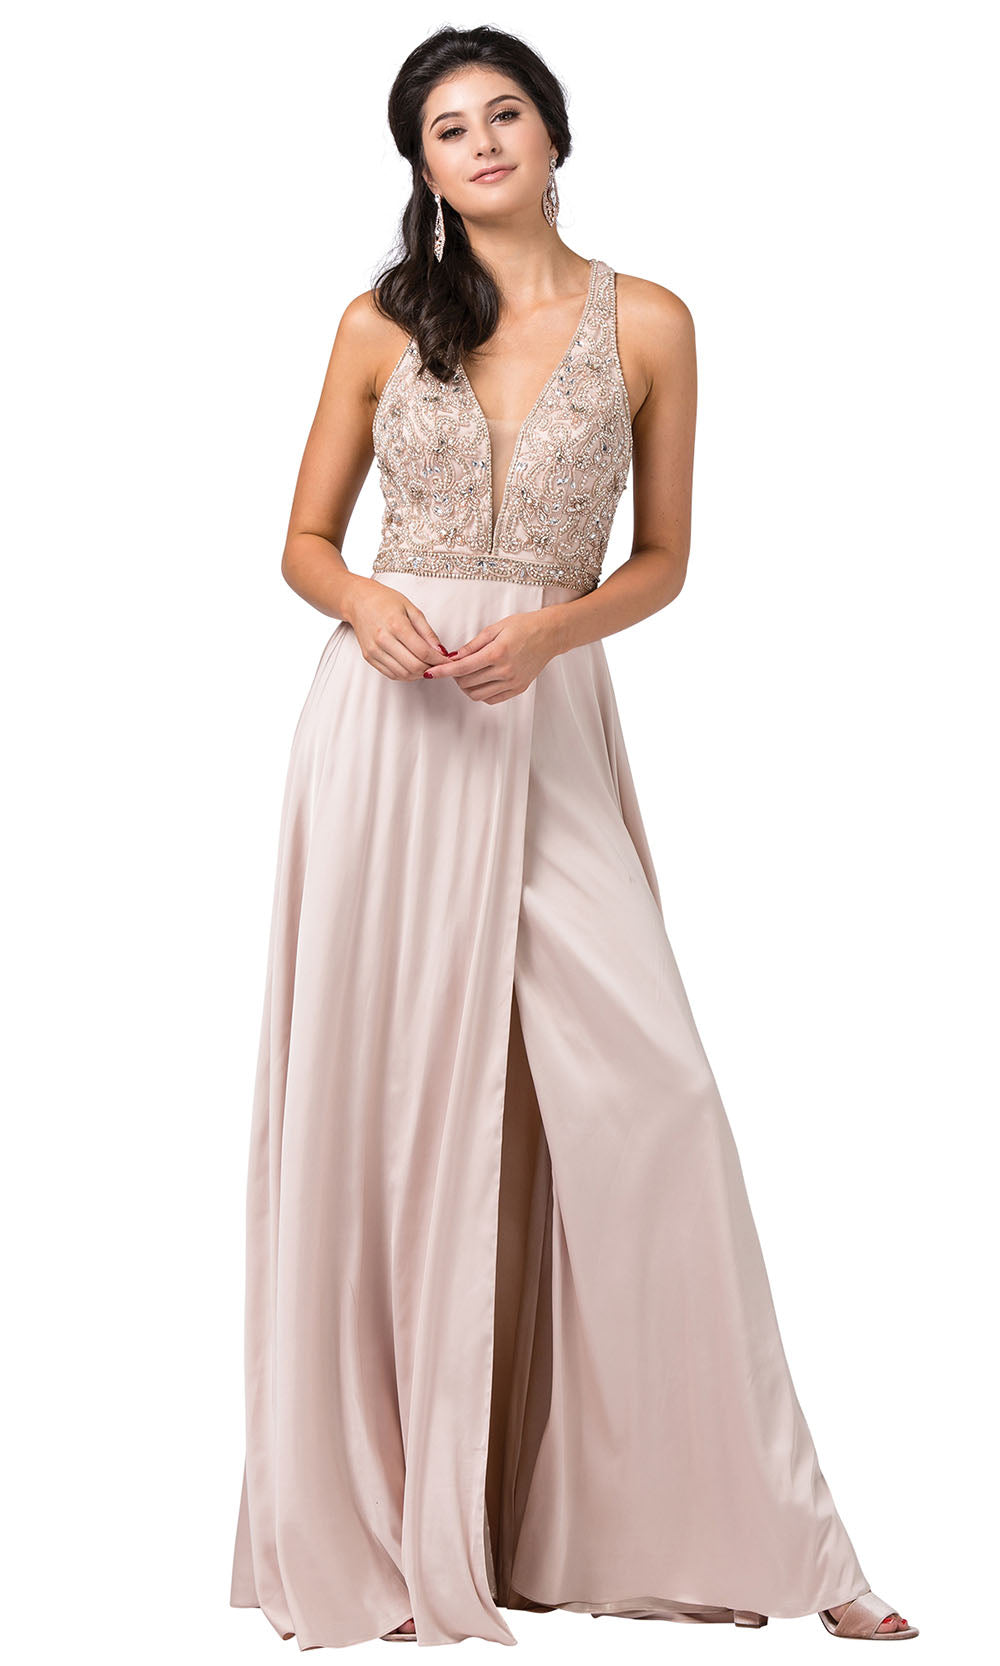 Dancing Queen - 2527 Beaded Crisscross Strapped A-Line Dress In Champagne & Gold